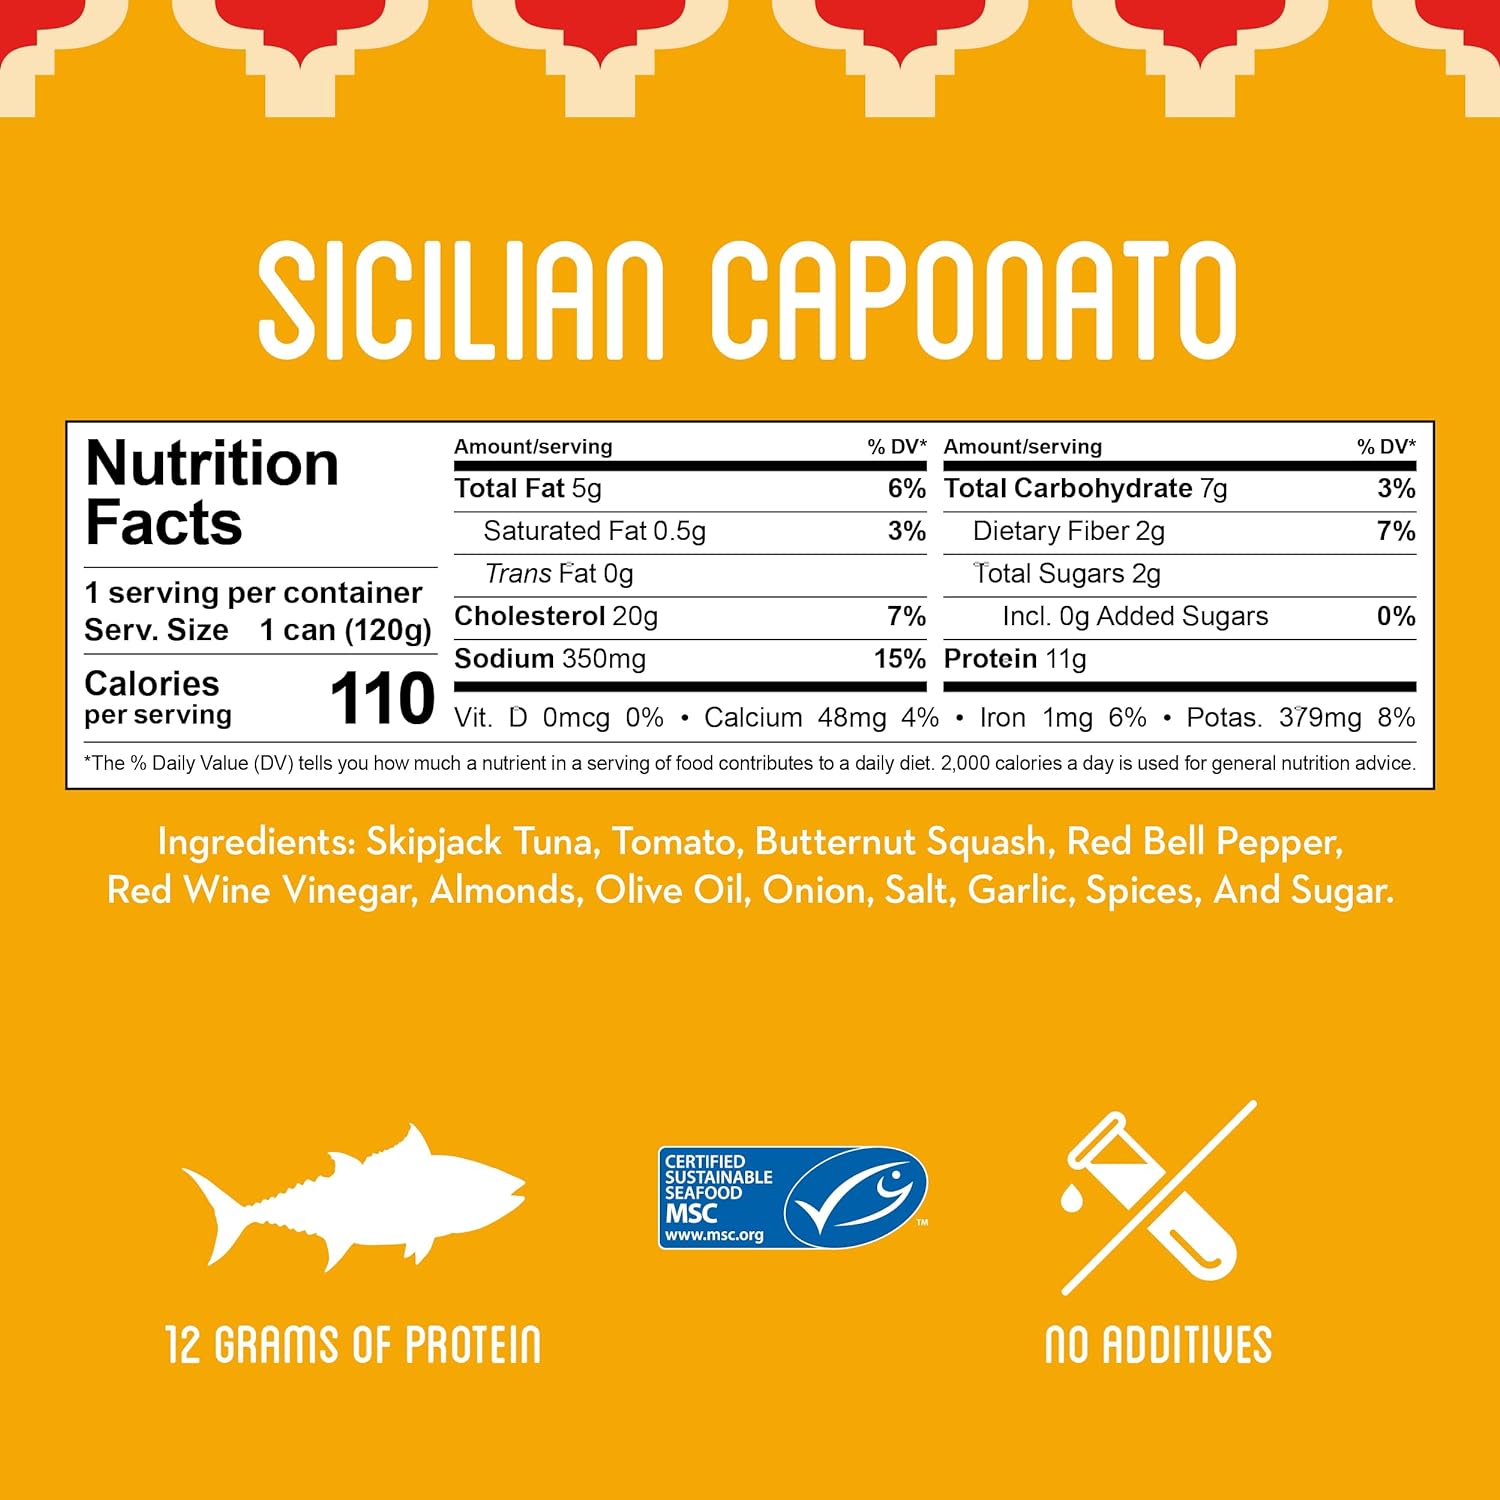 Freshé Gourmet Canned Tuna (Sicilian Caponata, 10 pack of 4.25 oz. tin) Freshly Packaged Skipjack Tuna Fish - Sustainably Caught - Perfect Gluten Free, High Protein Backpacking Food